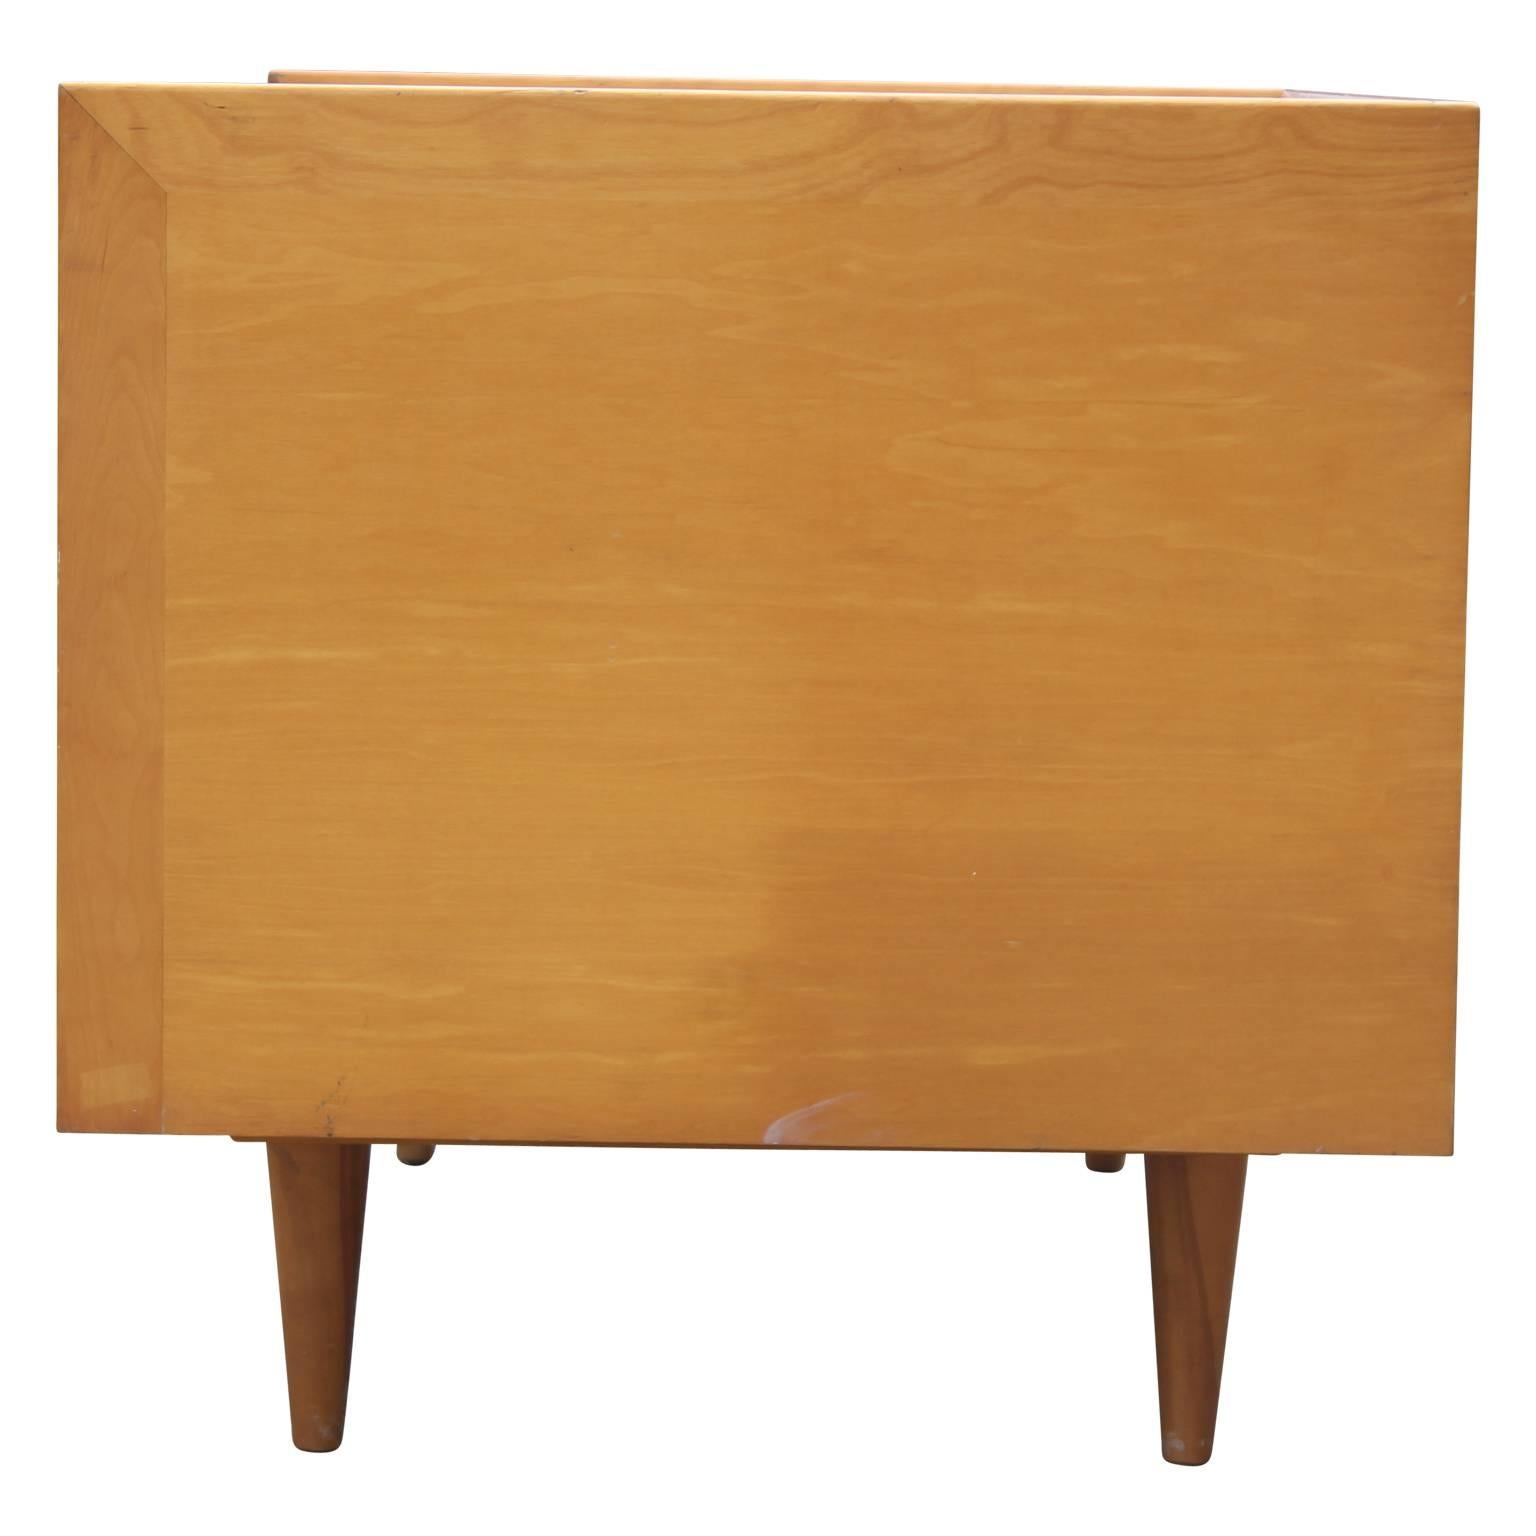 Mid-20th Century Modern Clean Lined Jens Risom Six Drawer Two Paneled Maple Wood Desk